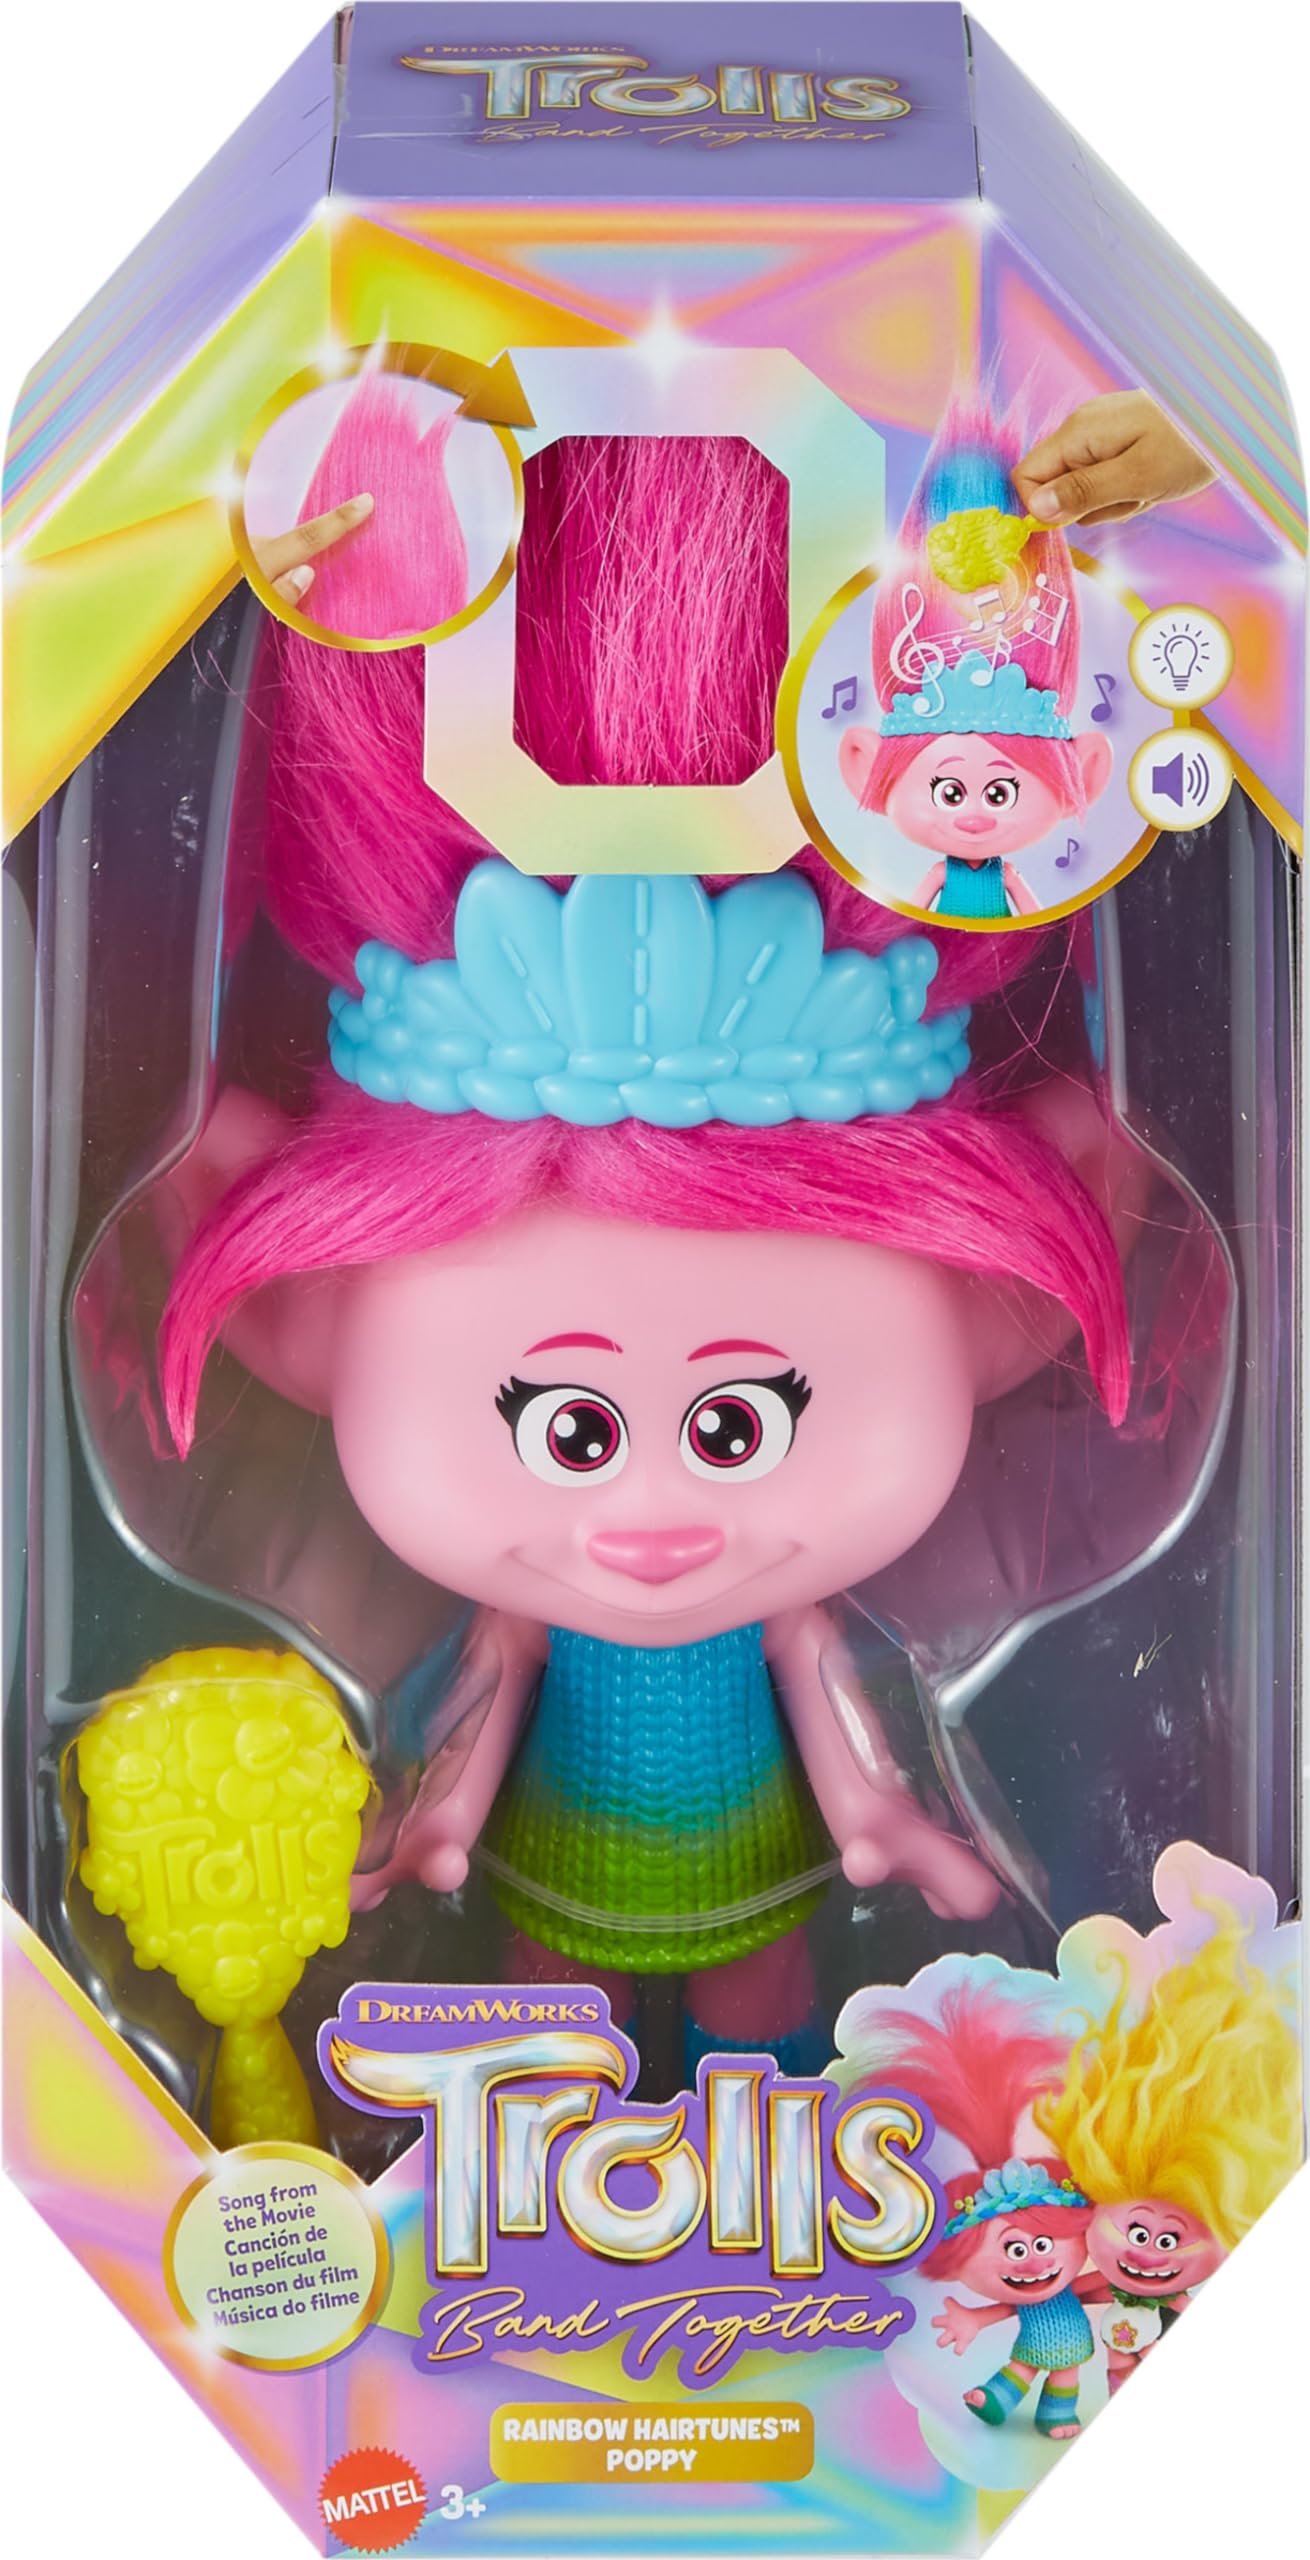 Mattel DreamWorks Trolls Band Together Rainbow HairTunes Queen Poppy Doll & Crown Accessory with Light-Up Hair, Music & Sounds